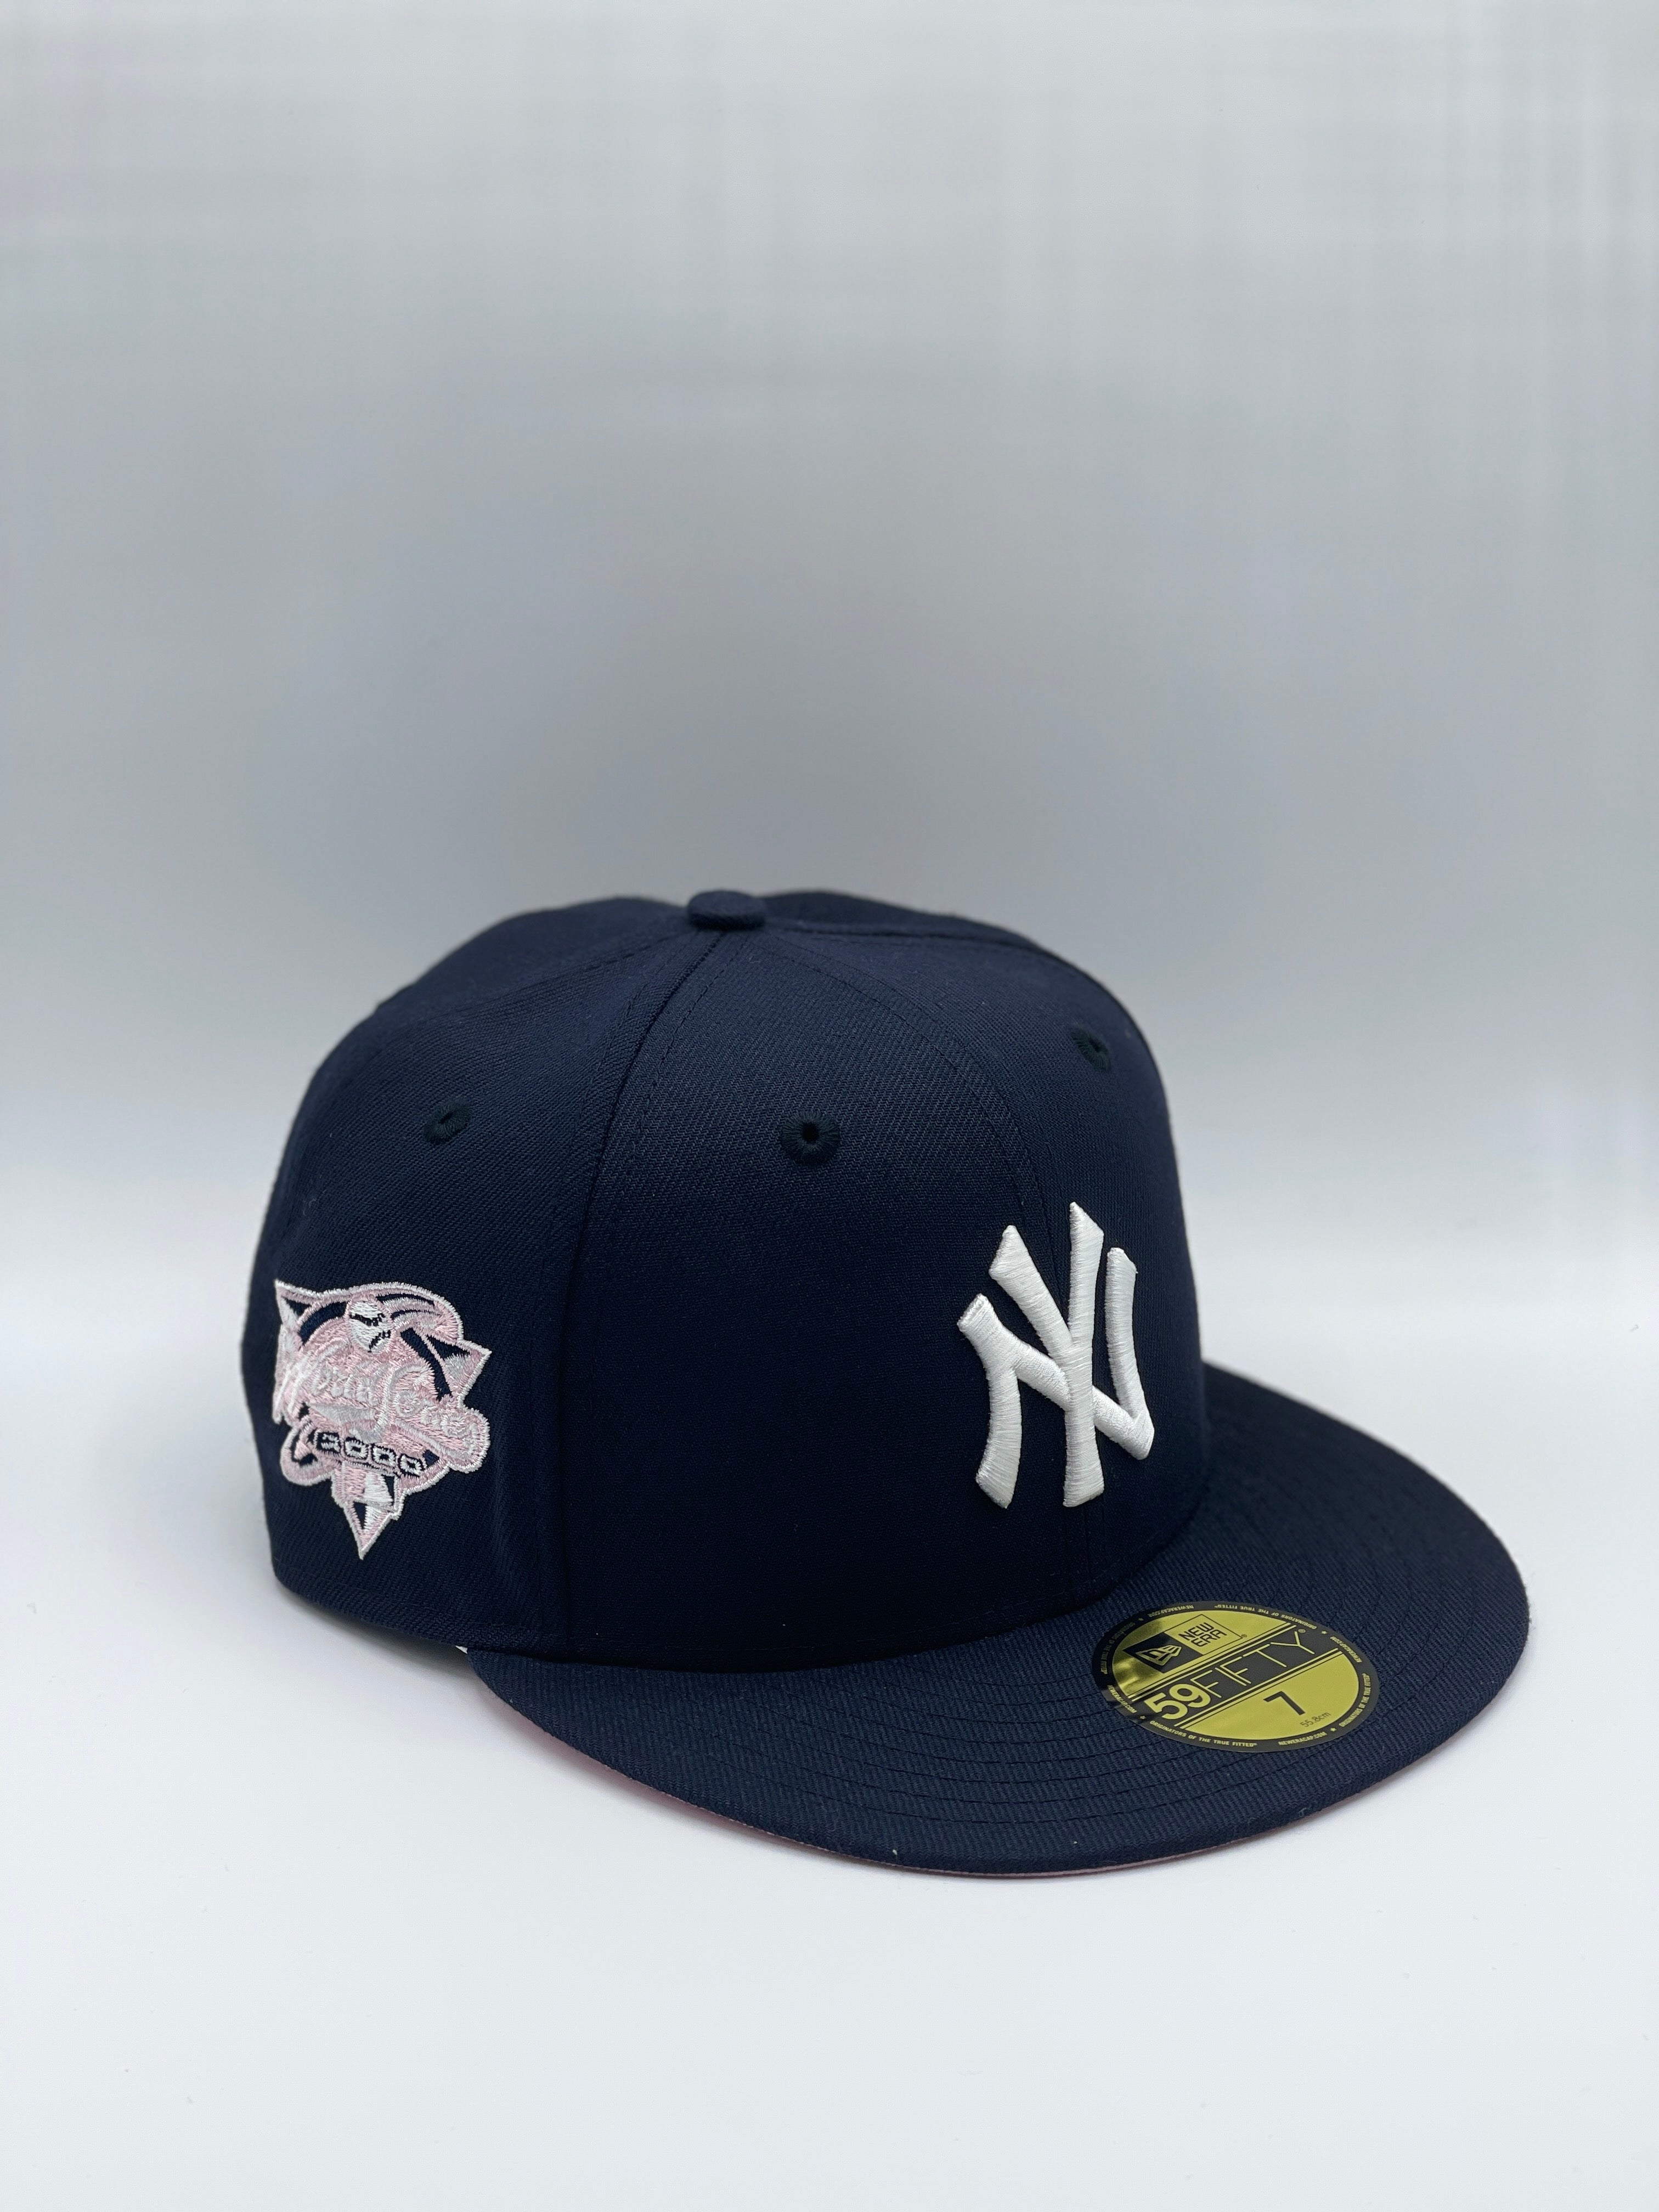 NEW YORK YANKEES x 2000 WS "PINK PATCH" NEW ERA 59FIFTY (PINK UV)